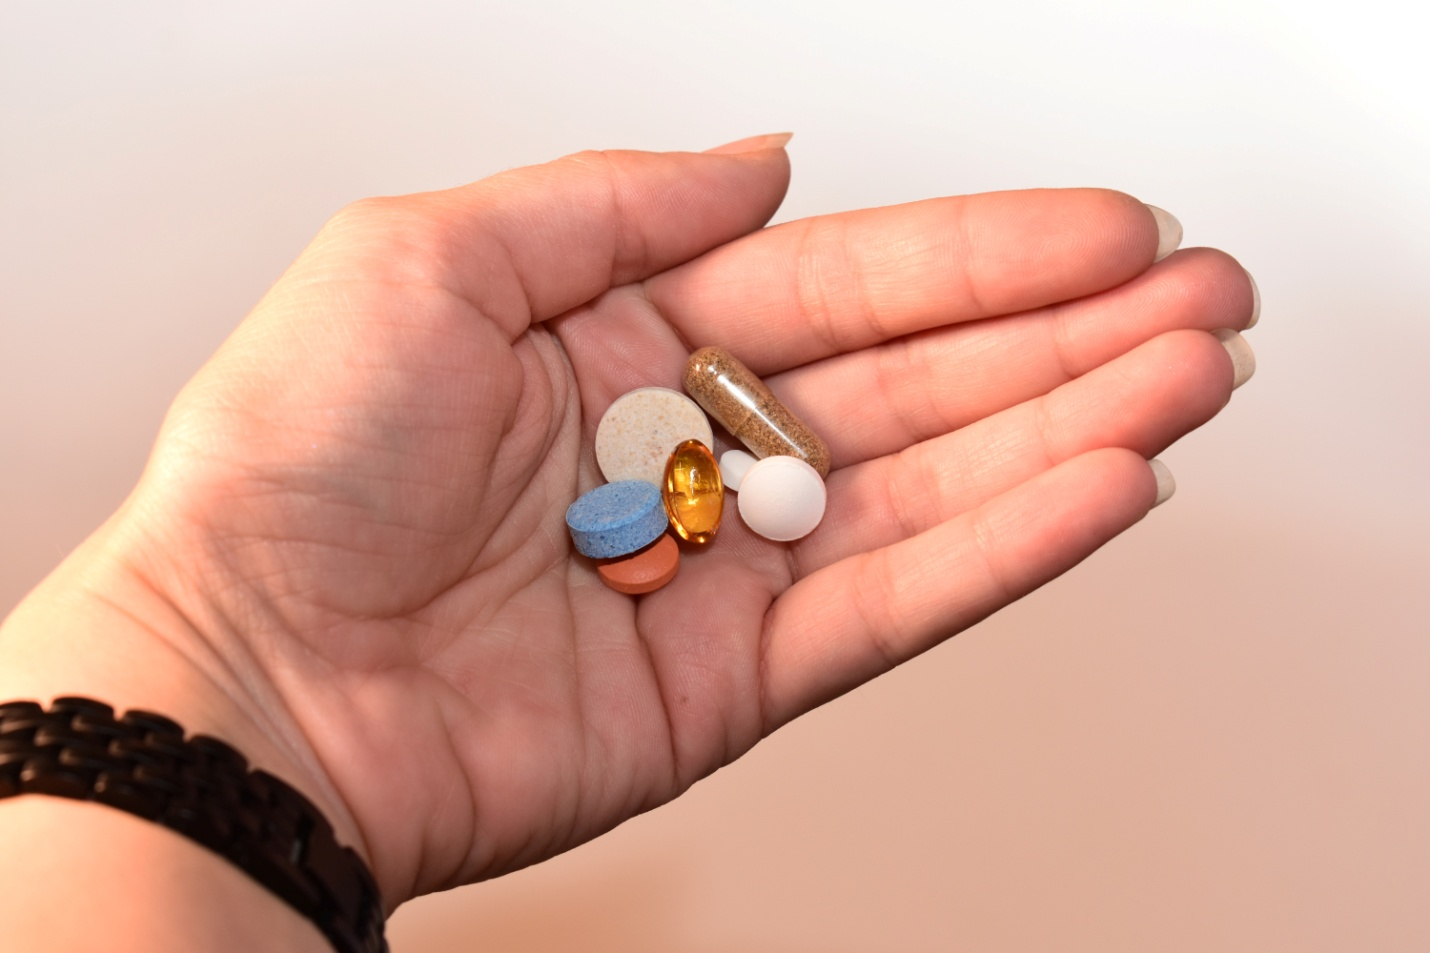  a person holding medicines